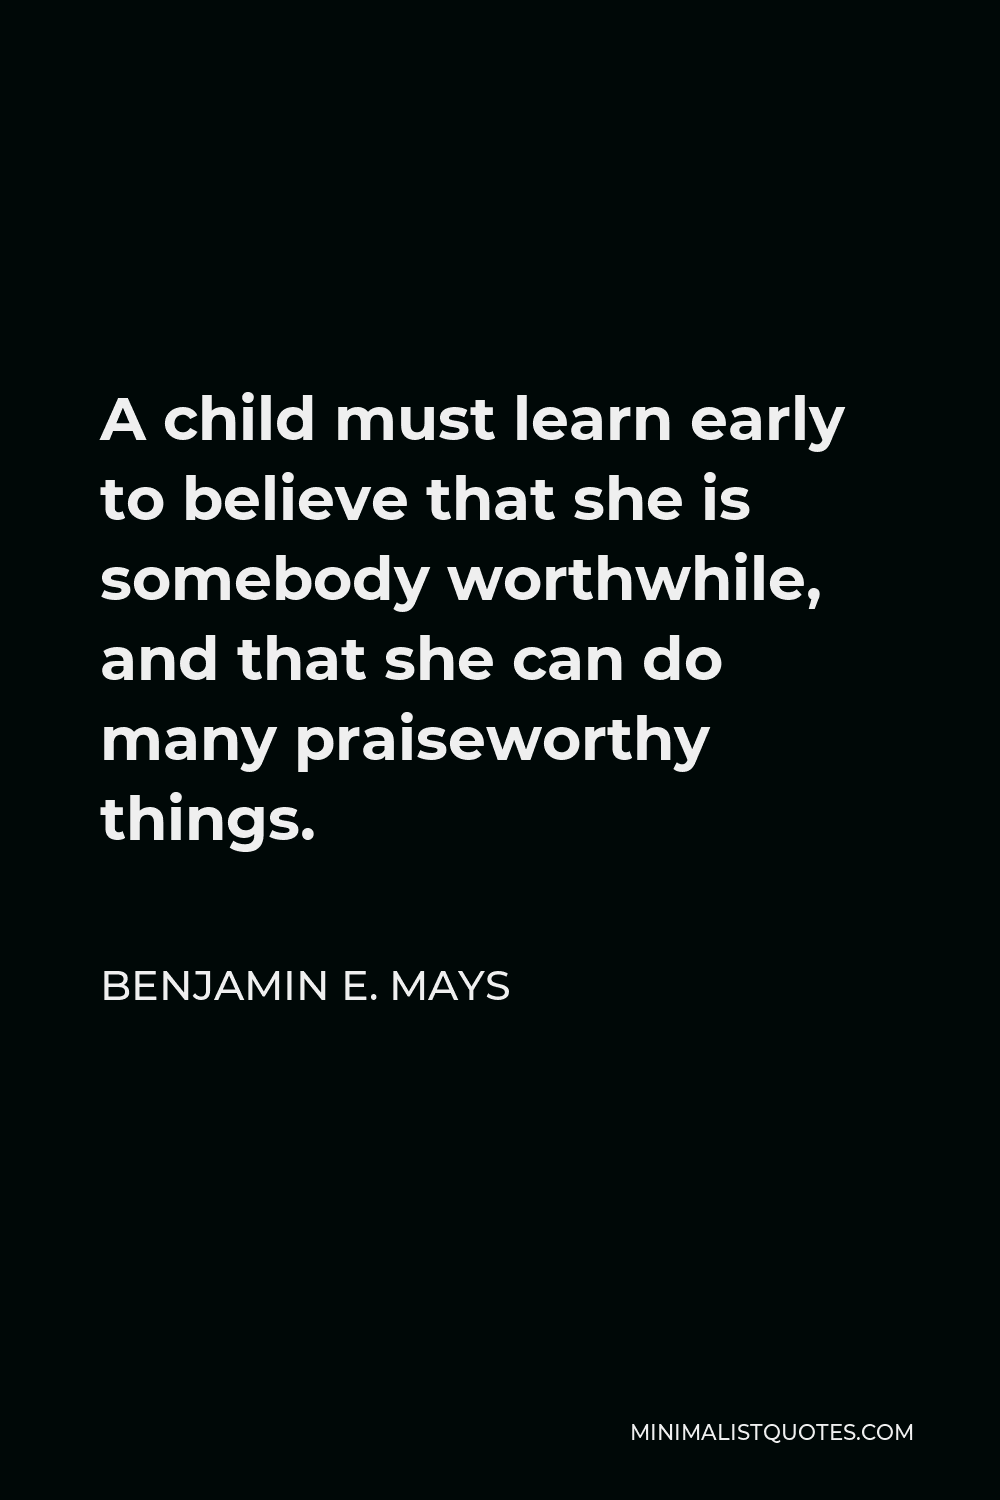 Benjamin E. Mays Quote - A child must learn early to believe that she is somebody worthwhile, and that she can do many praiseworthy things.